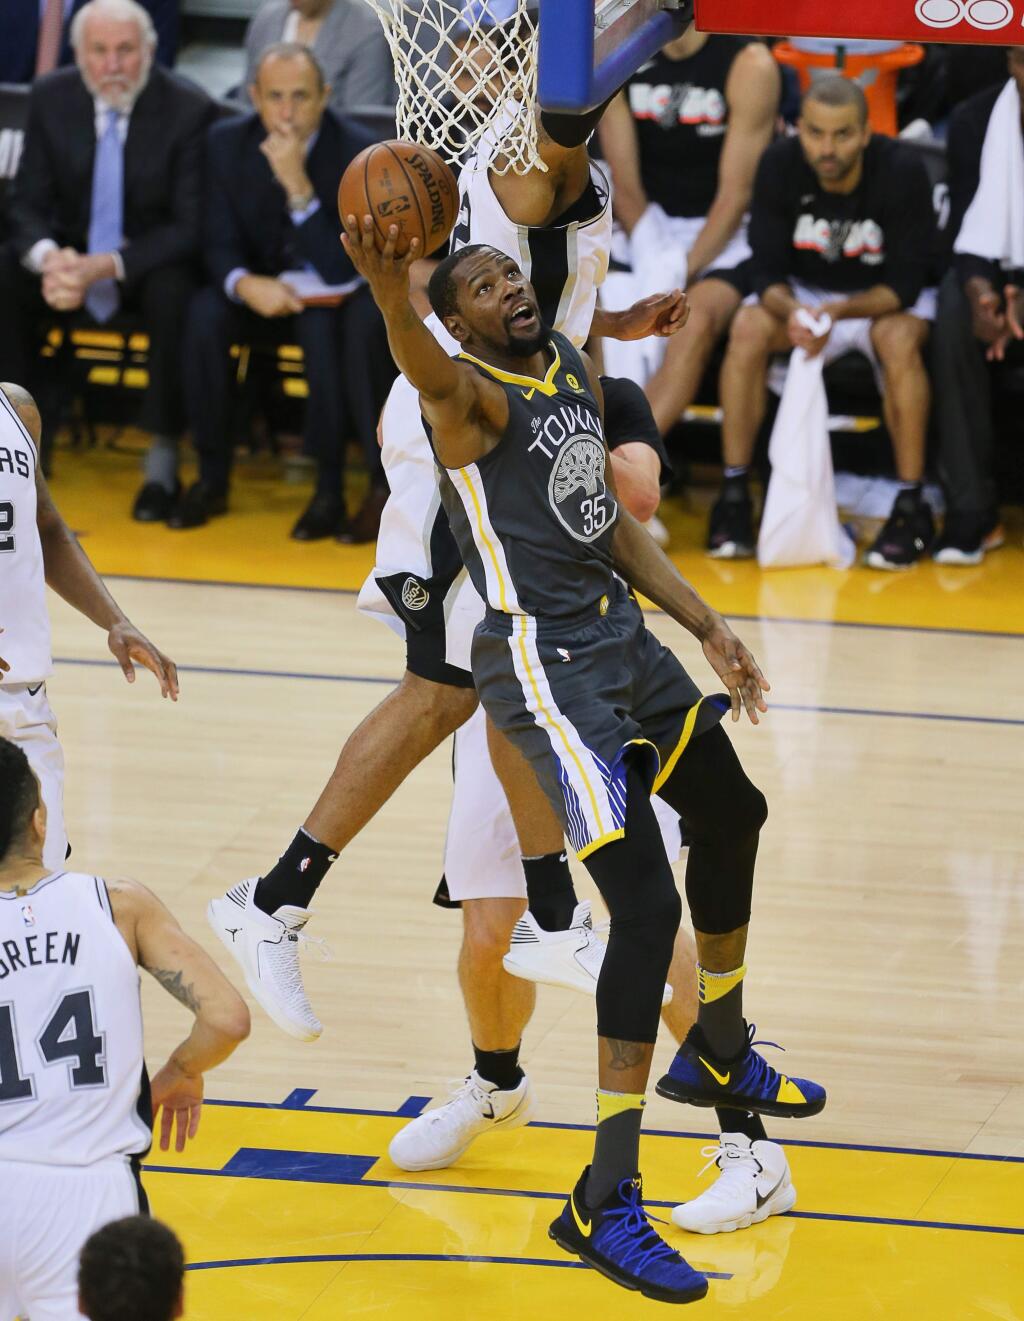 Golden State Warriors forward Kevin Durant scores on a layup against the San Antonio Spurs, during their game in Oakland on Monday, April 16, 2018. (Christopher Chung/ The Press Democrat)